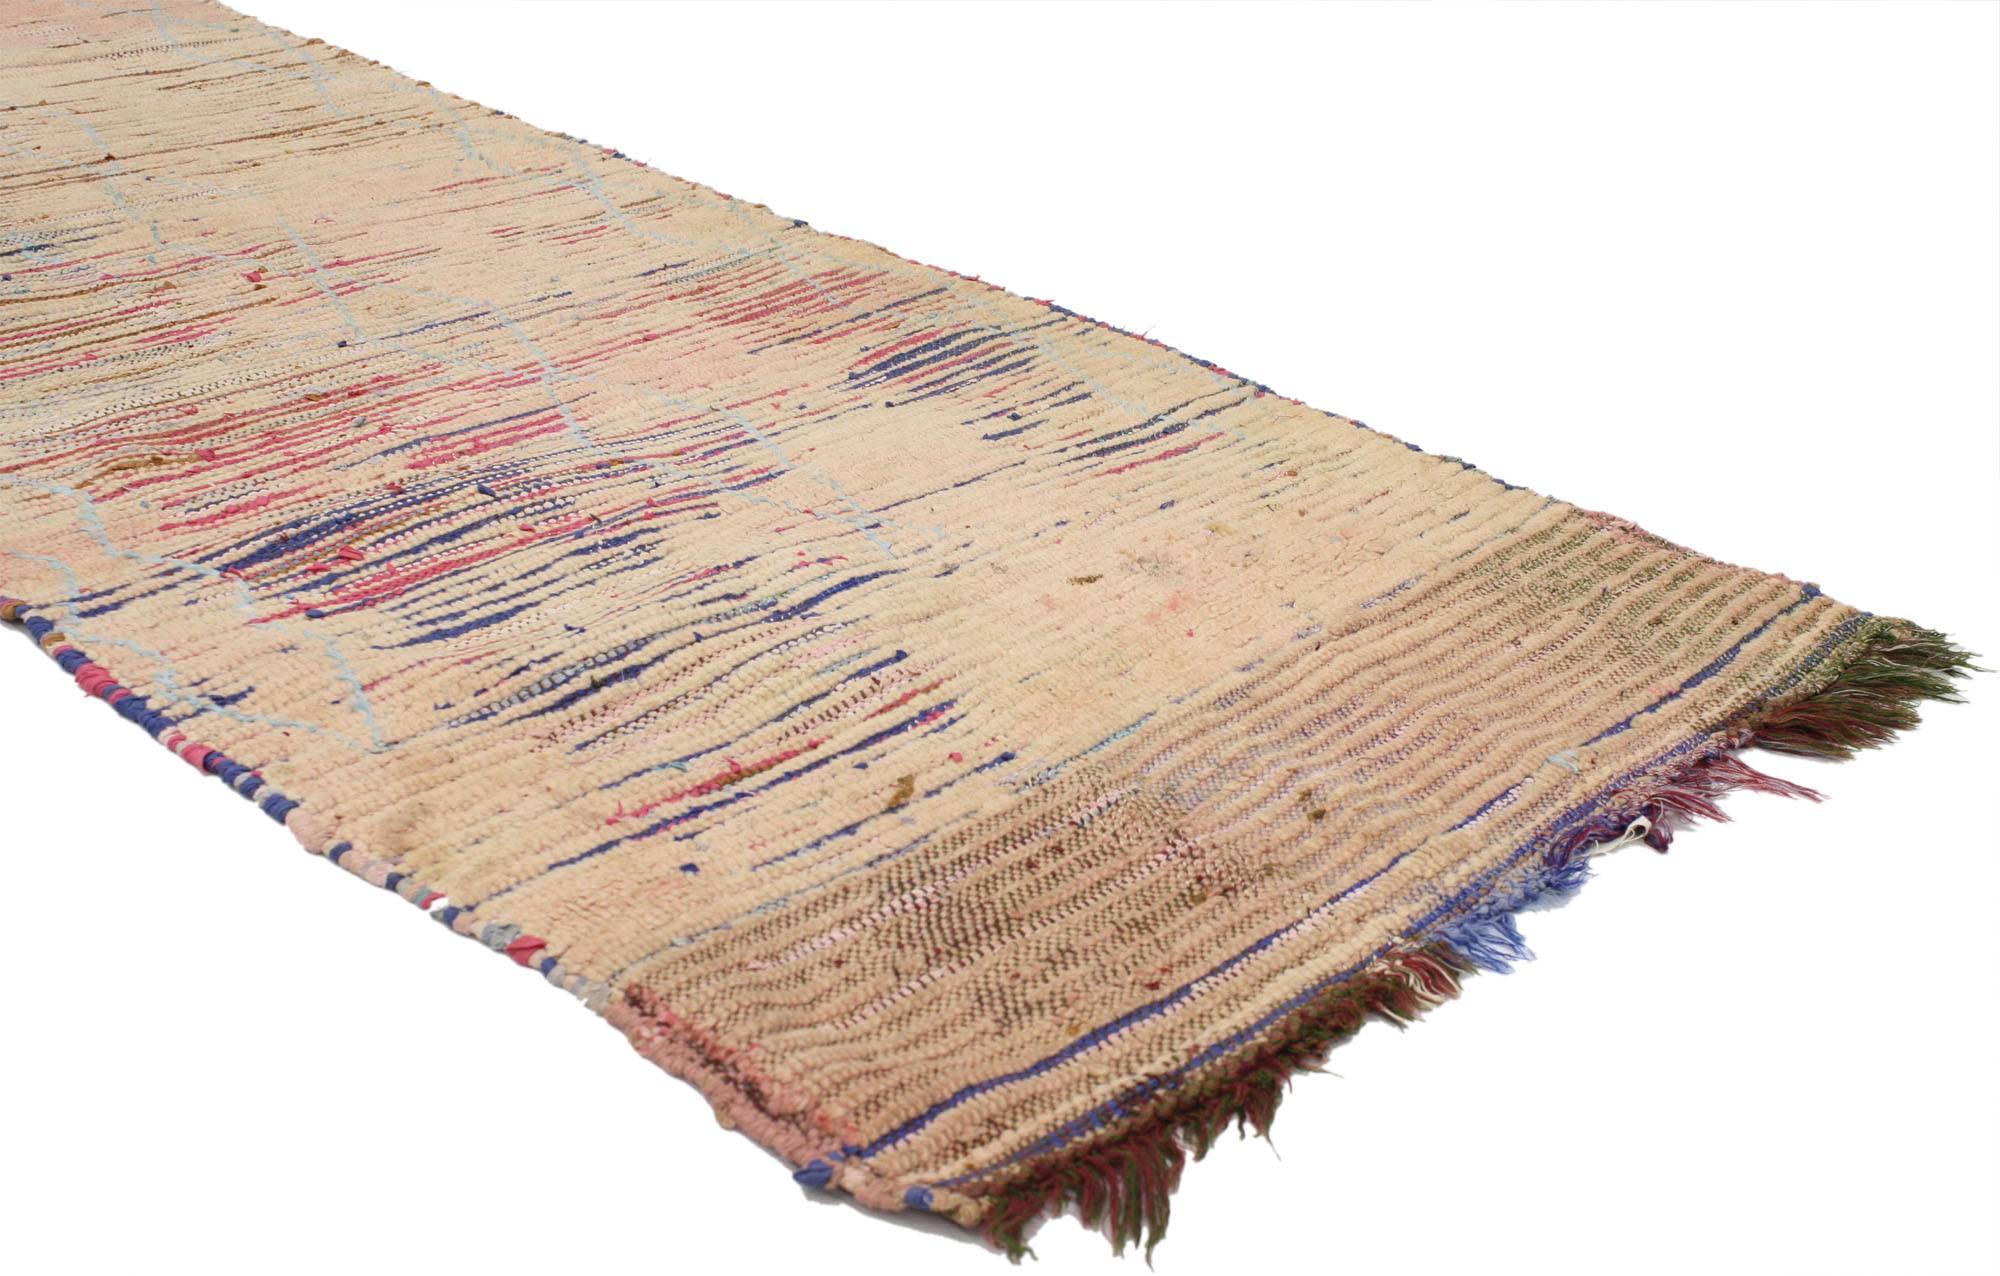 Post-Modern Vintage Berber Moroccan Runner with Soft Pastel Colors and Hygge Style